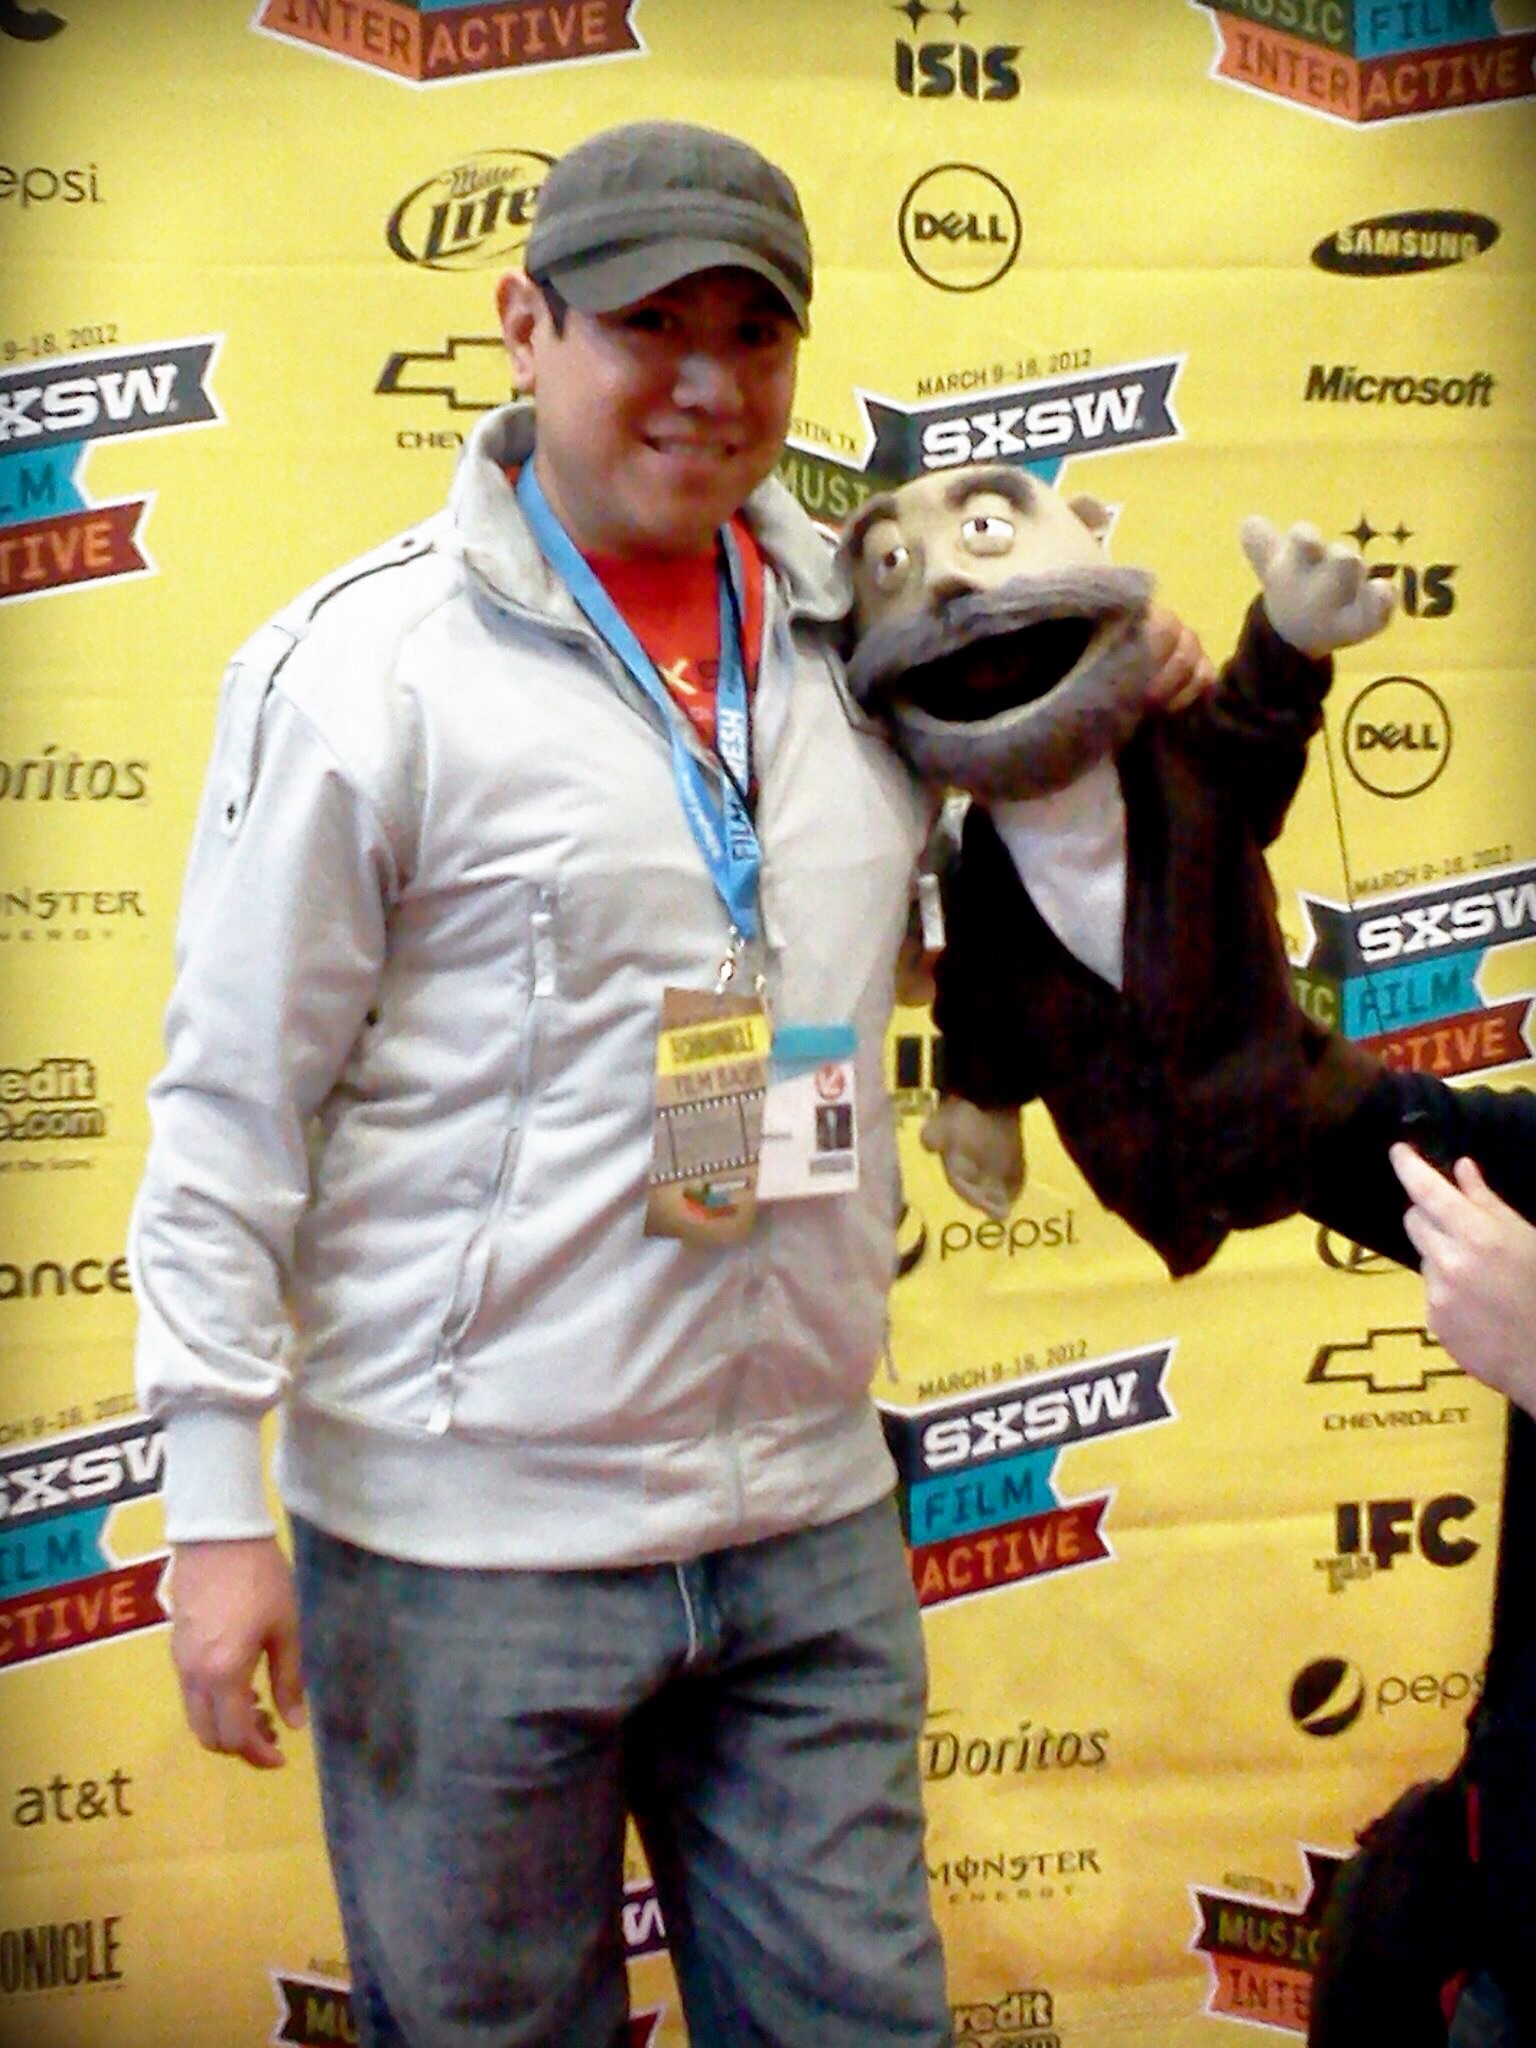 Red carpet with the Jim Henson workshop at SXSW 2012